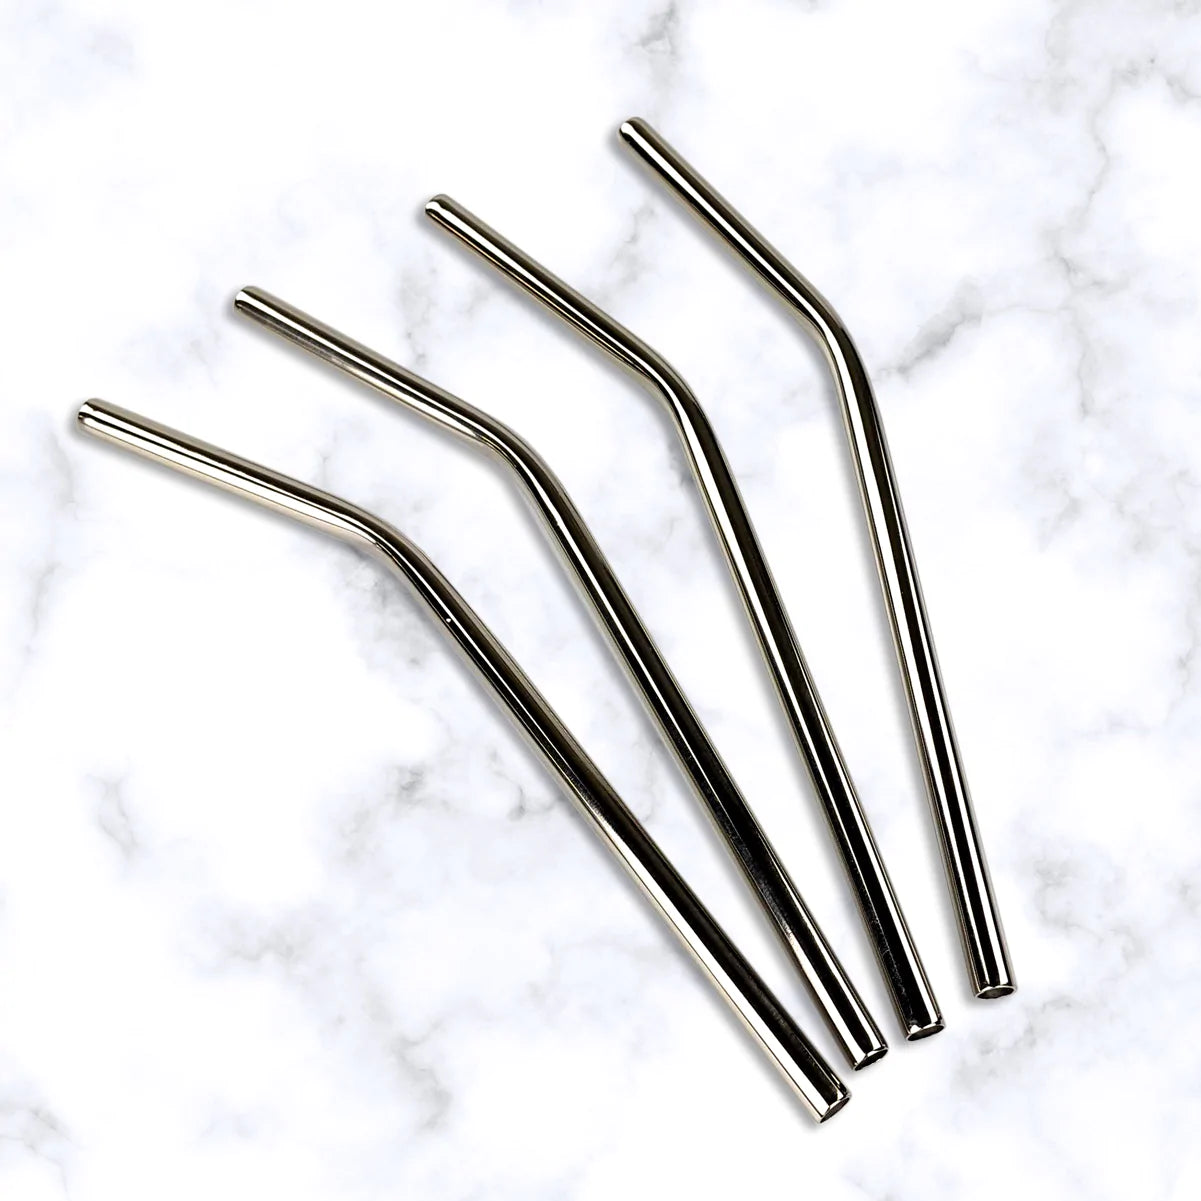 Metal straws for drinks that are reusable and environmentally safe.  Set of four made of food safe stainless steel.  Comes with clean brush and storage case.